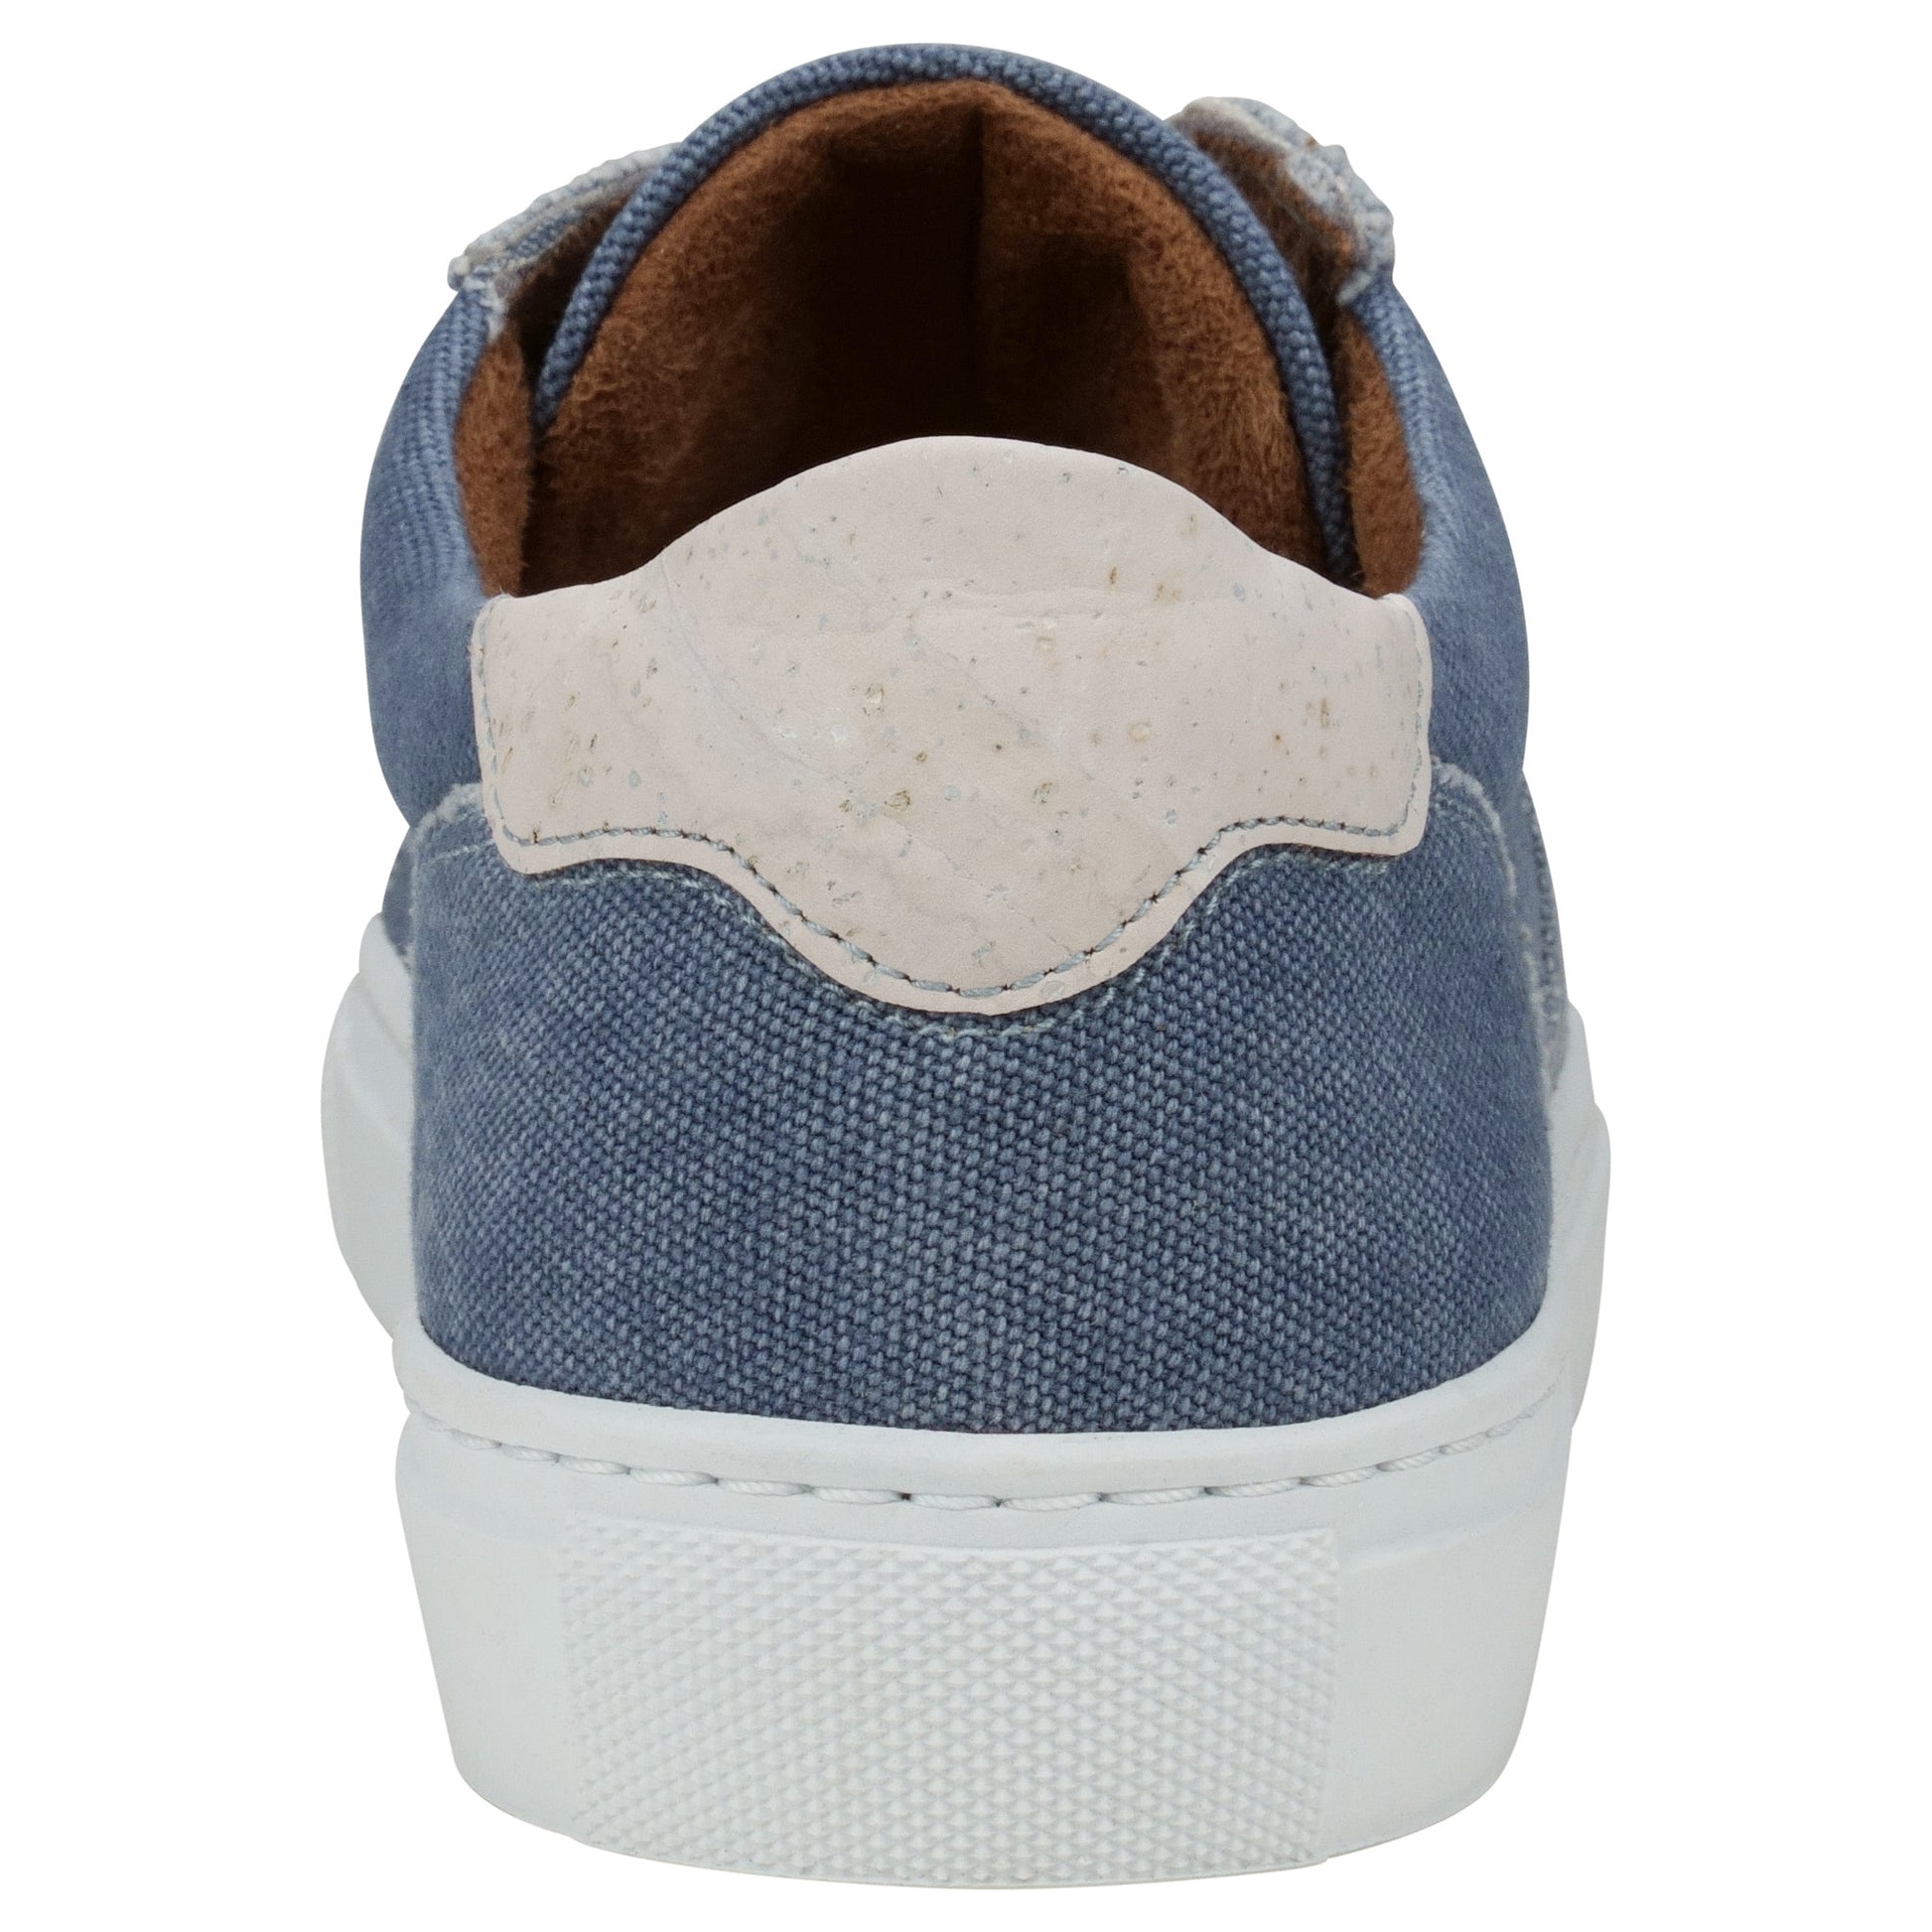 Close up back view denim sneaker with white cork counter